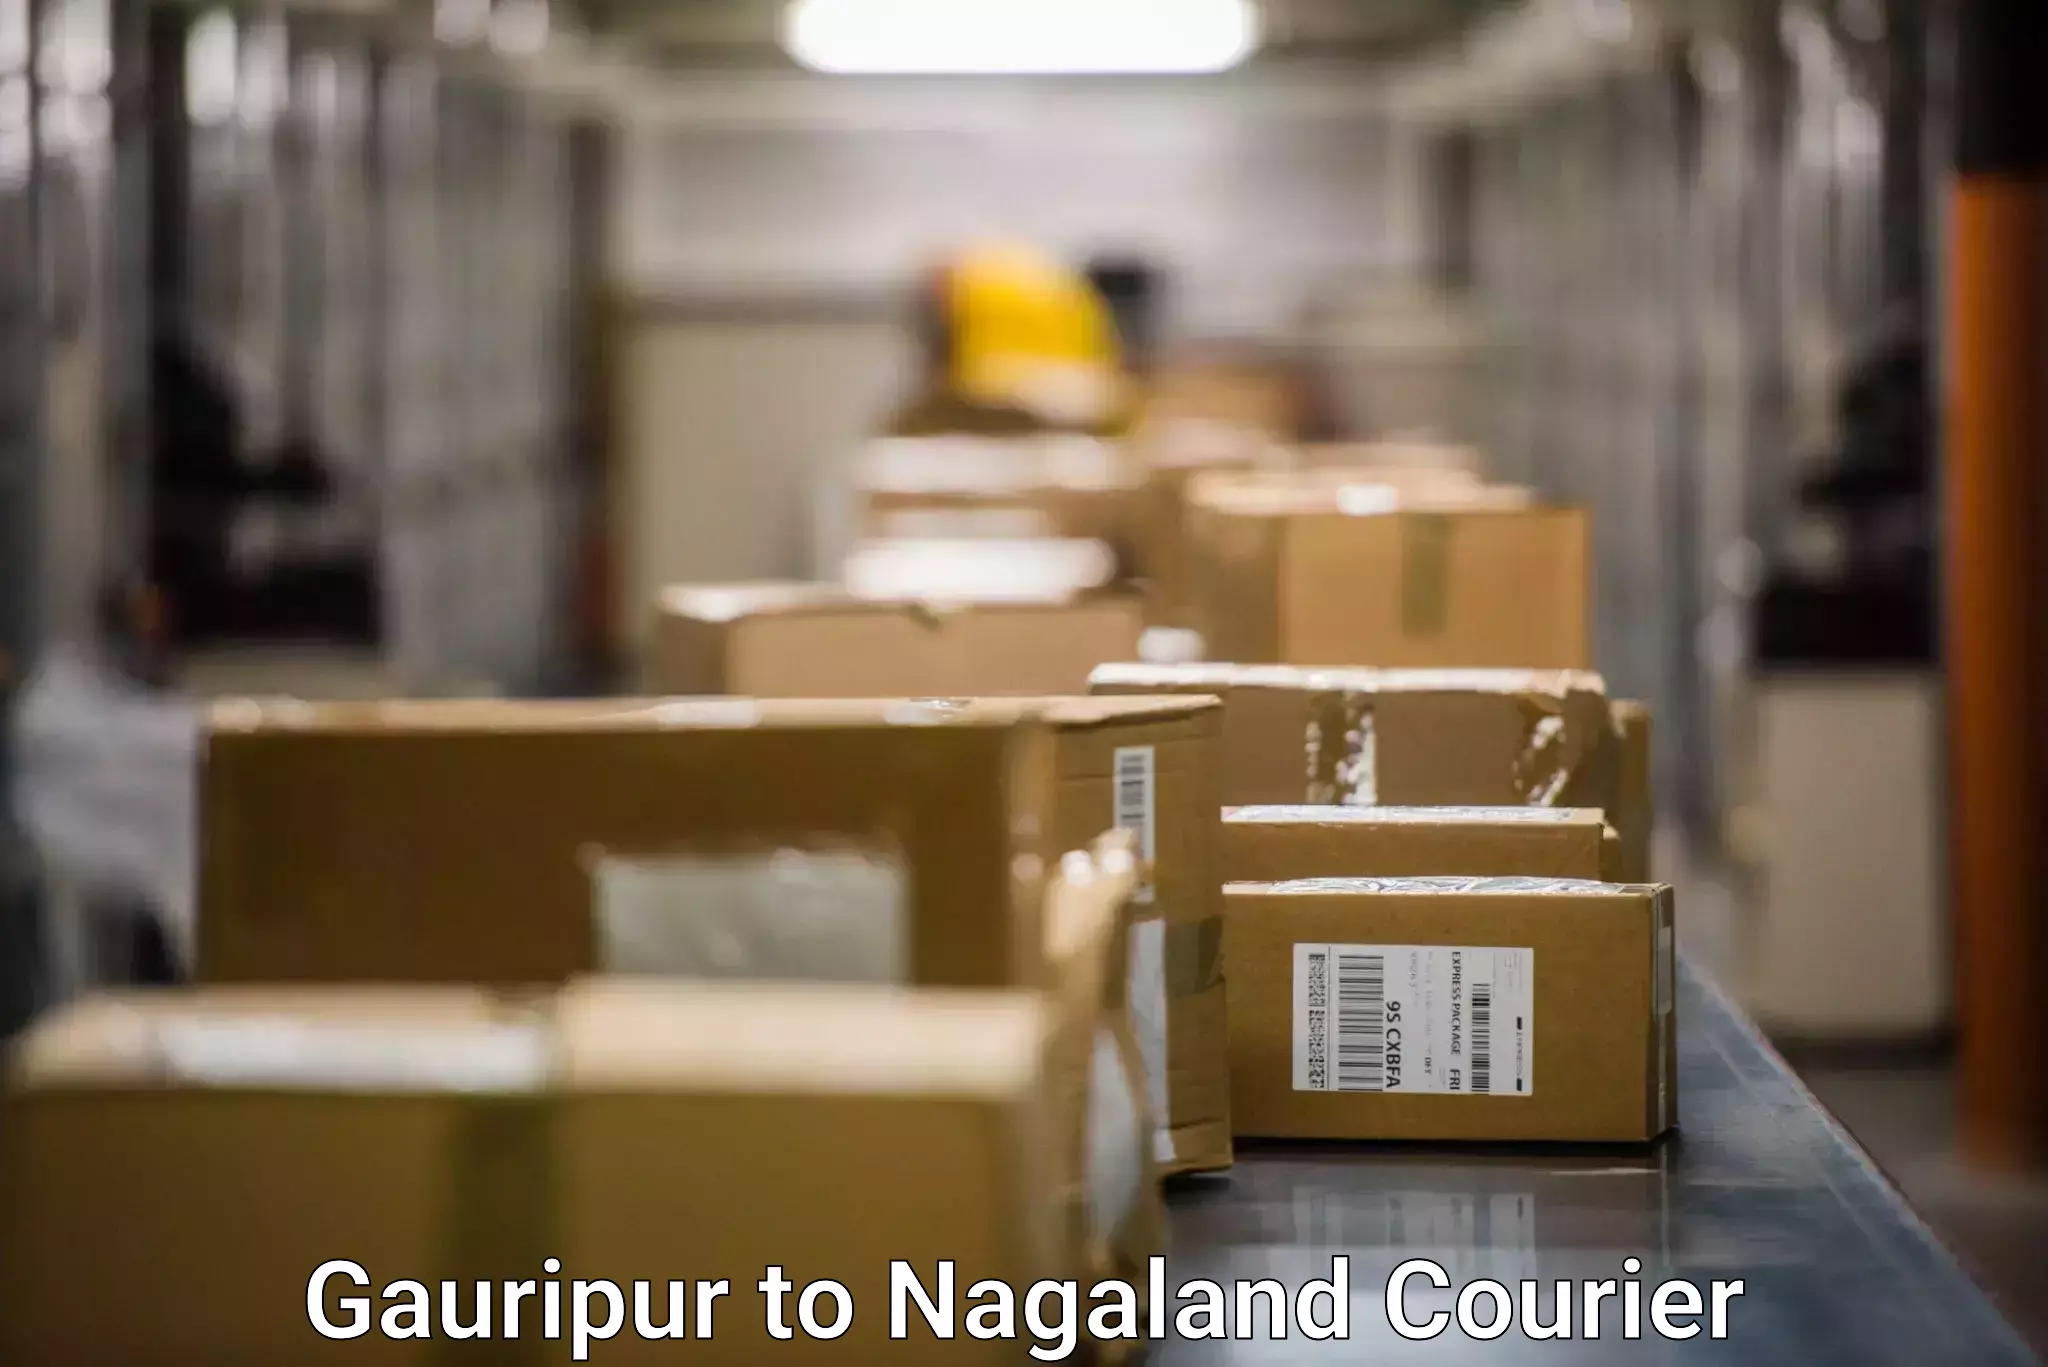 On-demand shipping options Gauripur to Mon